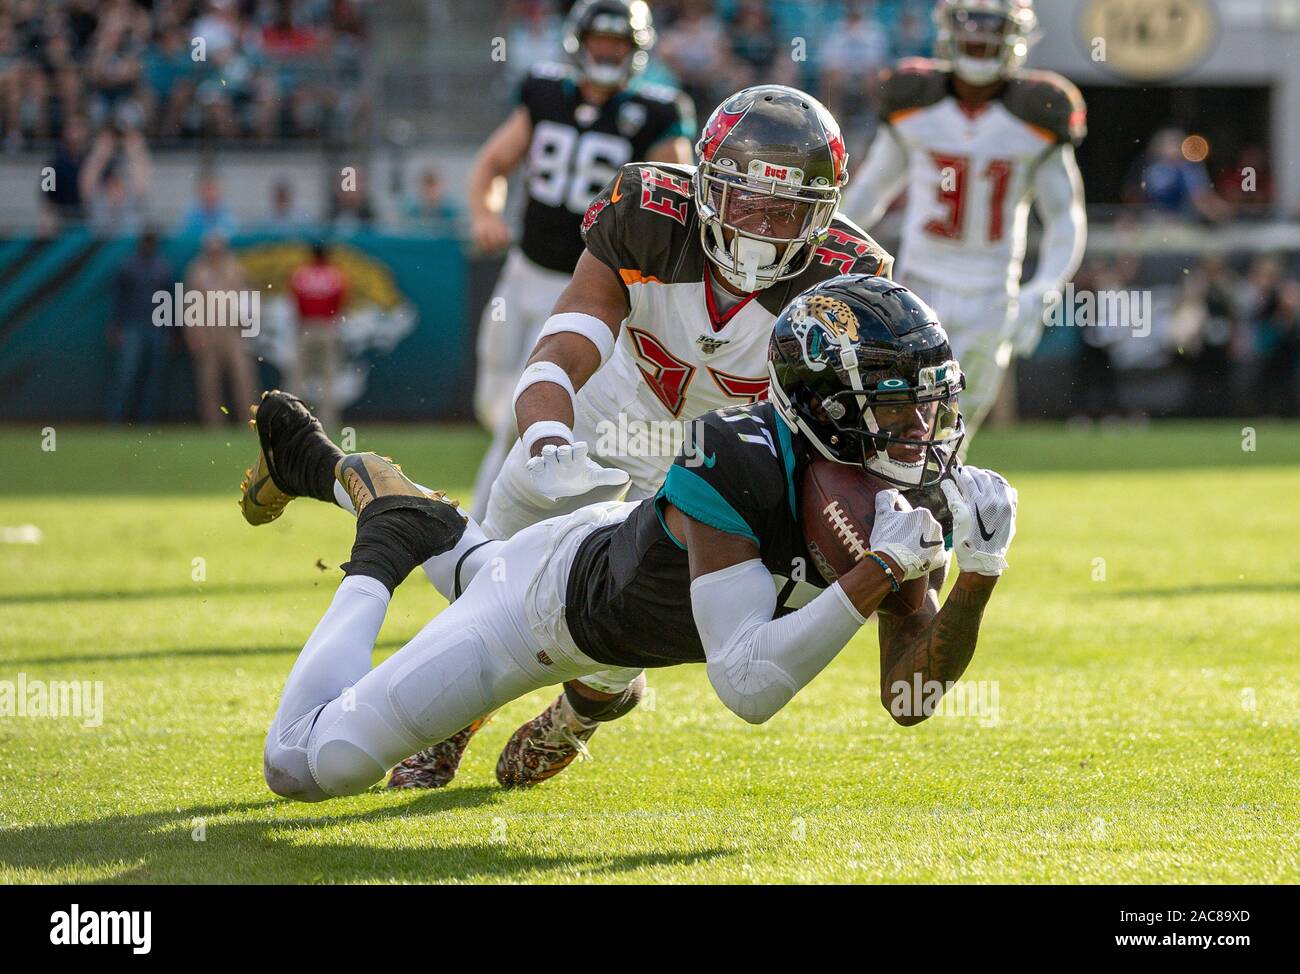 Jacksonville, FL, USA. 1st Dec, 2019. Tampa Bay Buccaneers cornerback Carlton Davis (33) is unable to defend a catch by Jacksonville Jaguars wide receiver D.J. Chark (17) during 2nd half NFL football game between the Tampa Bay Buccaneers and the Jacksonville Jaguars. Buccaneers defeated Jaguars 28-11 at TIAA Bank Field in Jacksonville, Fl. Romeo T Guzman/CSM/Alamy Live News Stock Photo